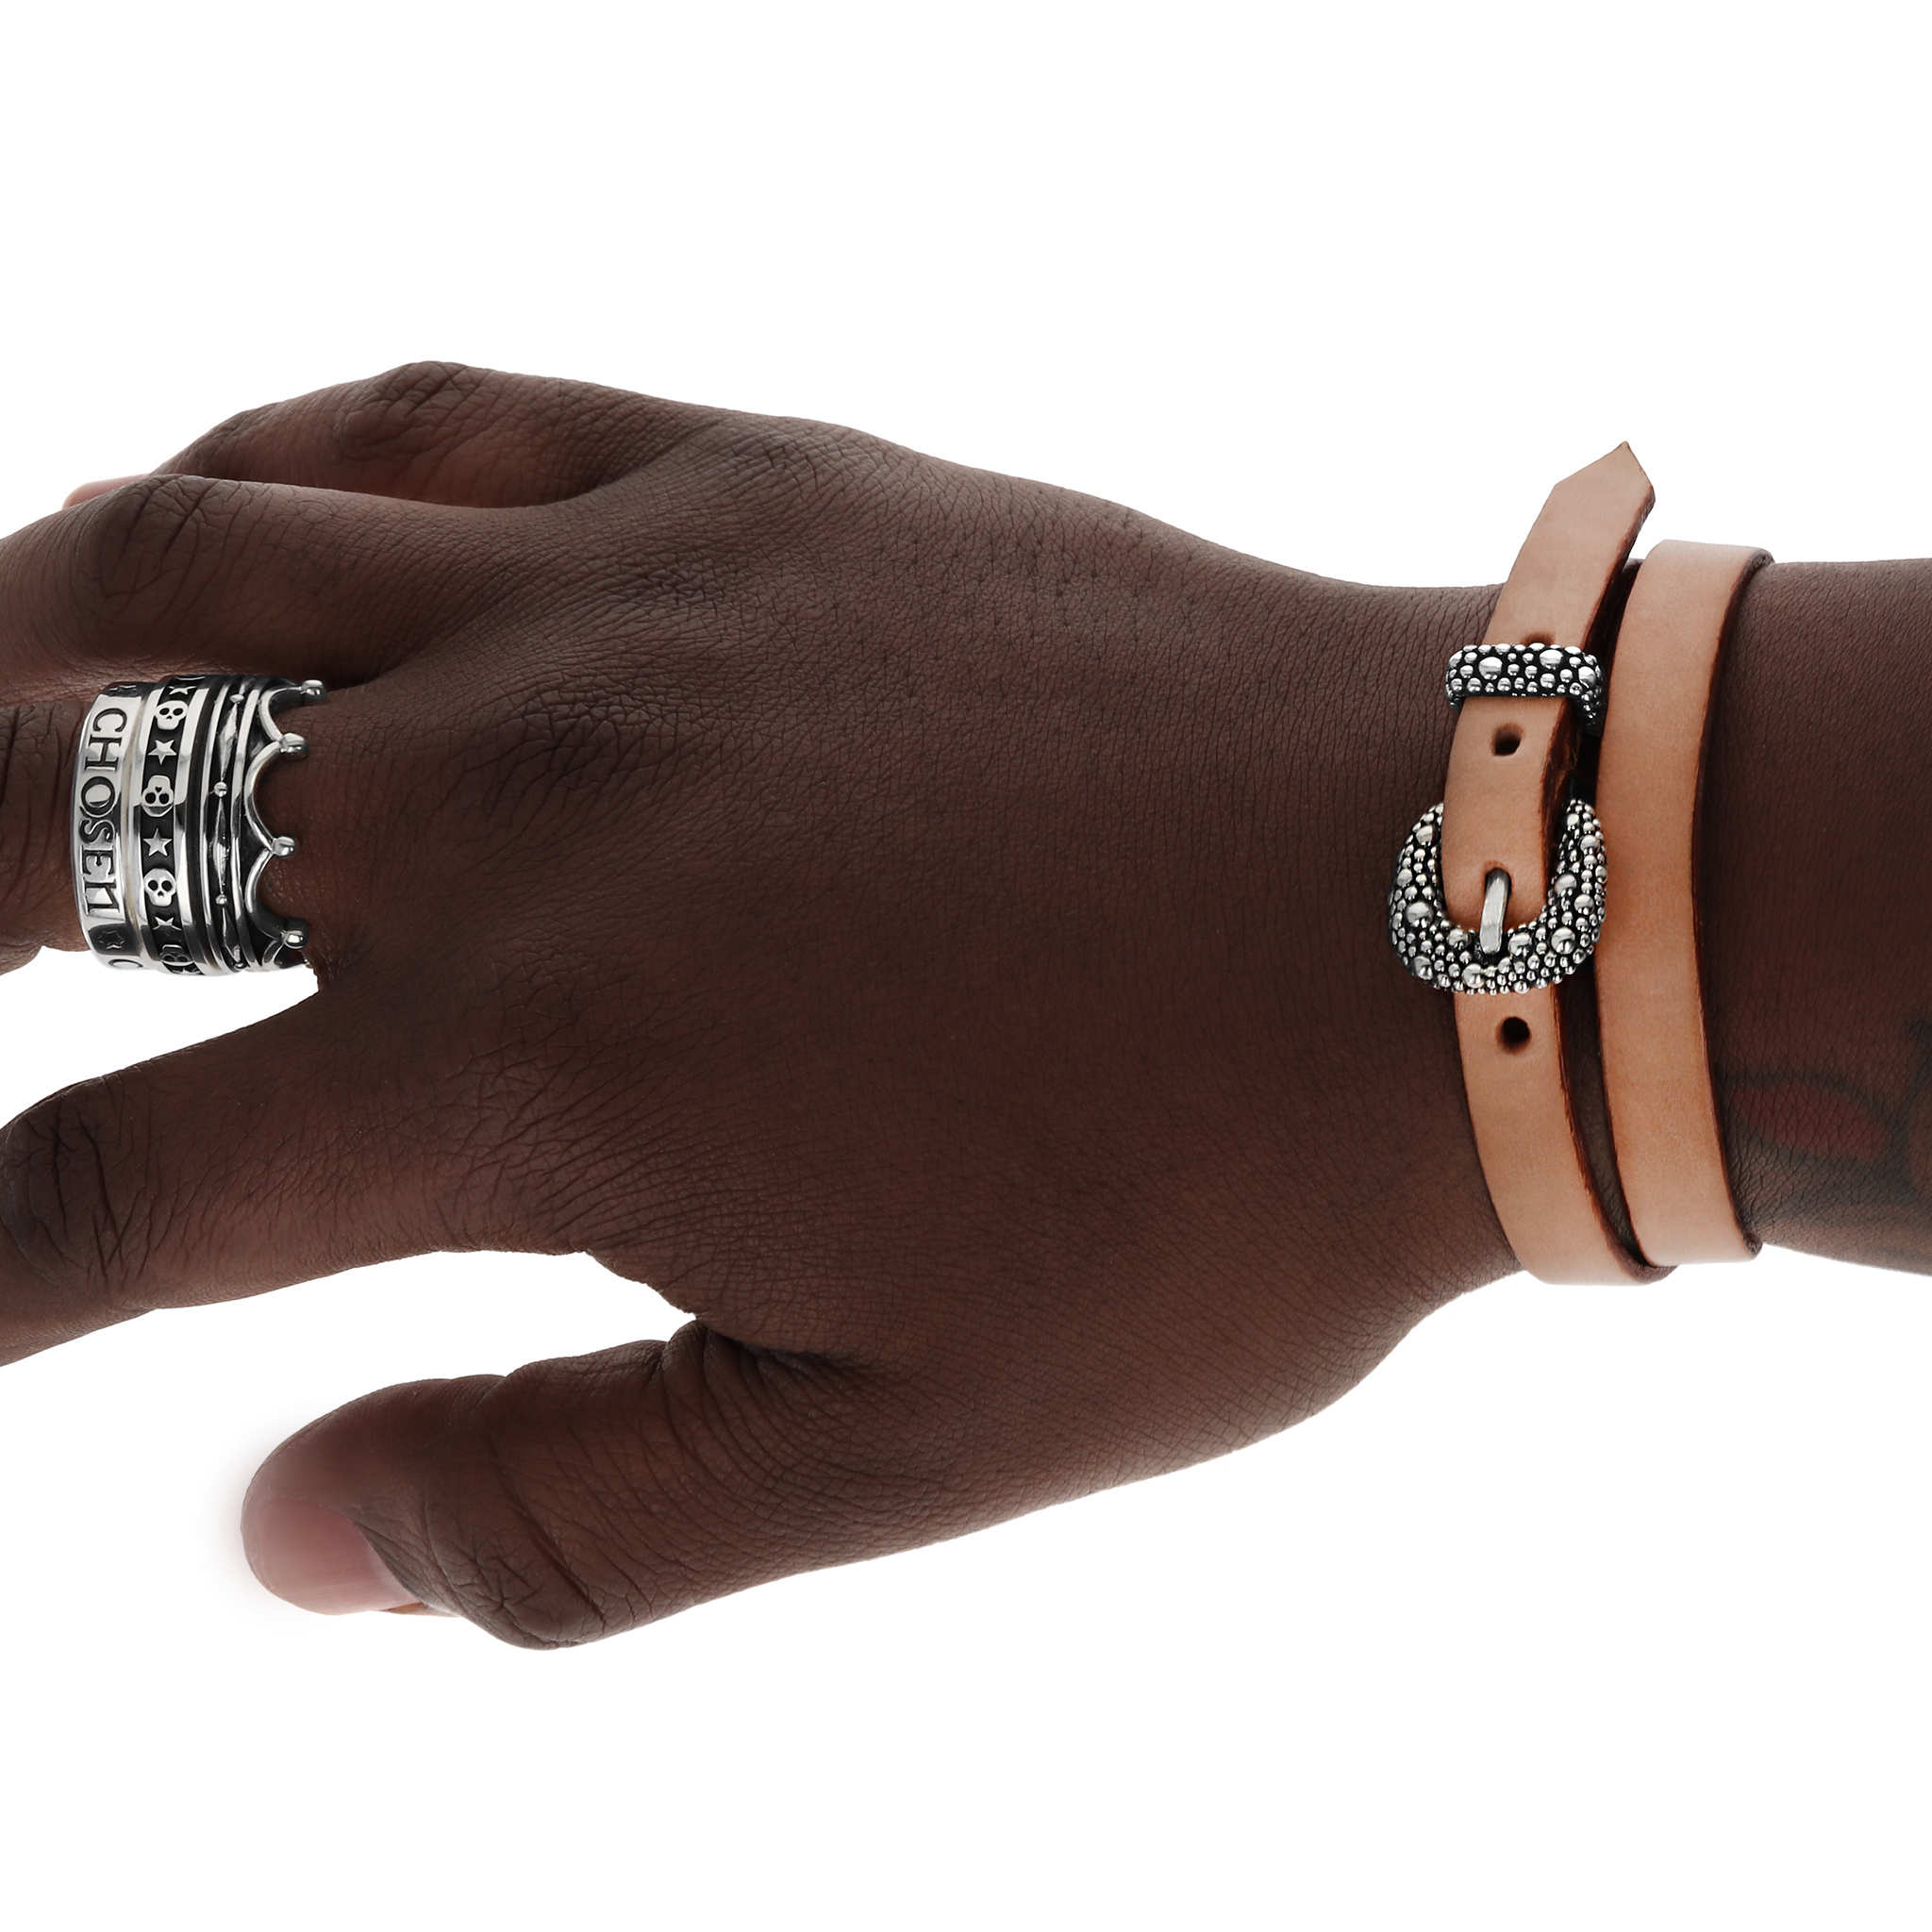 Brown Double Wrap Leather Bracelet with Stingray Buckle on model's wrist